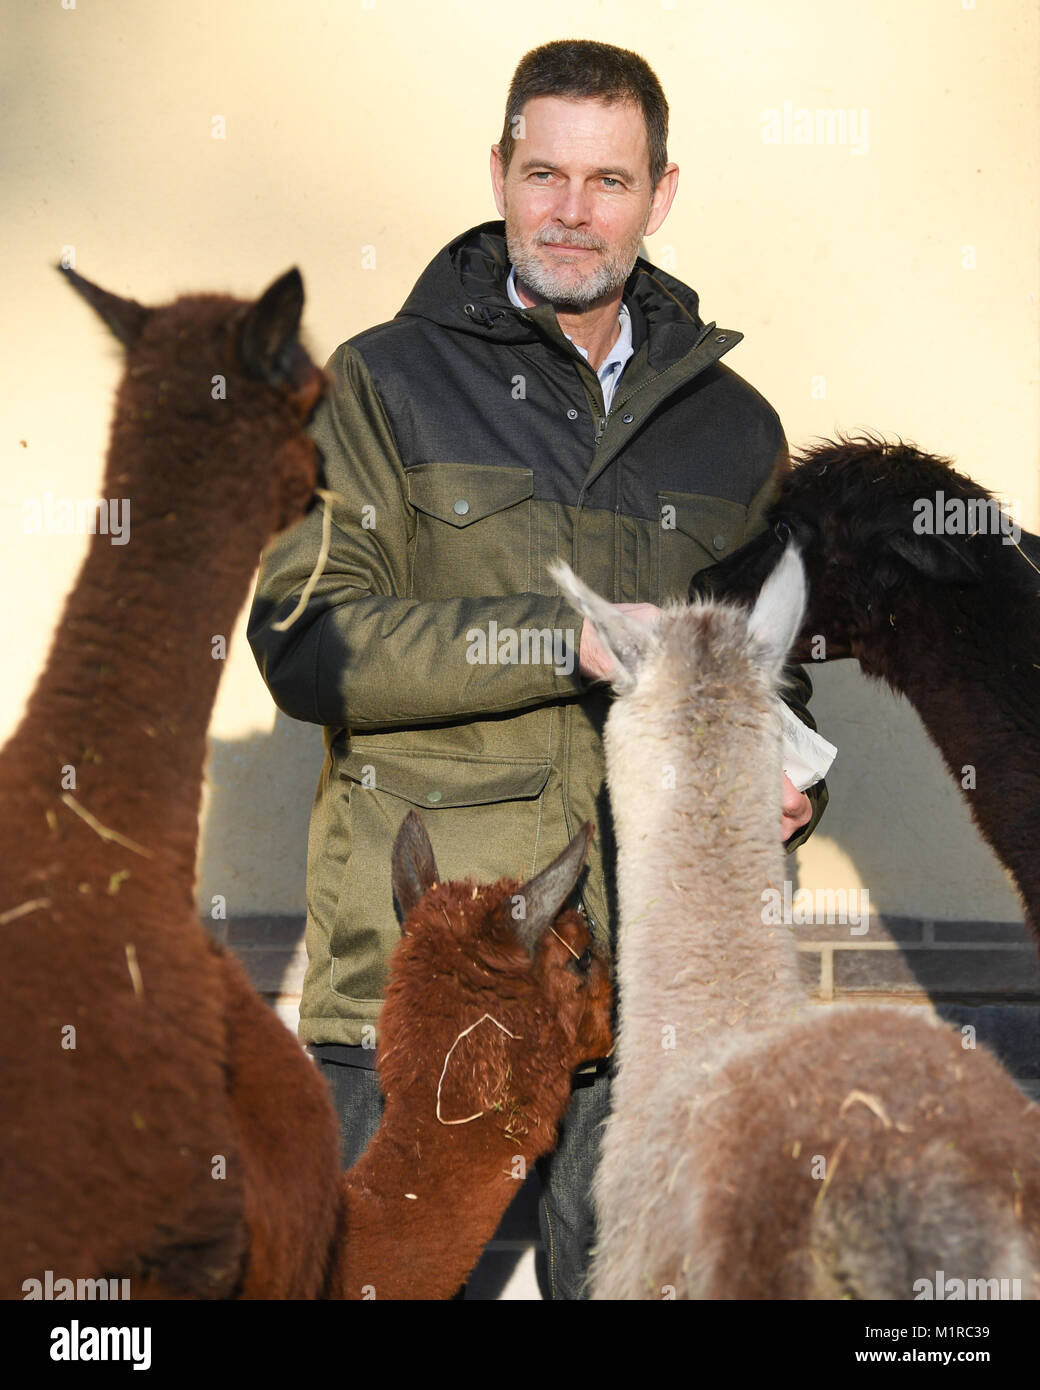 Frankfurt am Main, Germany. 19th Jan, 2018. The Spaniard Miguel Casares, designated director of the Frankfurt Zoo feeds Alpacas in their cage in Frankfurt am Main, Germany, 19 January 2018. The 51 year old veterinarian will take over as head of the Frankfurt Zoo, which is steeped in tradition, in February 2018. Credit: Arne Dedert/dpa/Alamy Live News Stock Photo